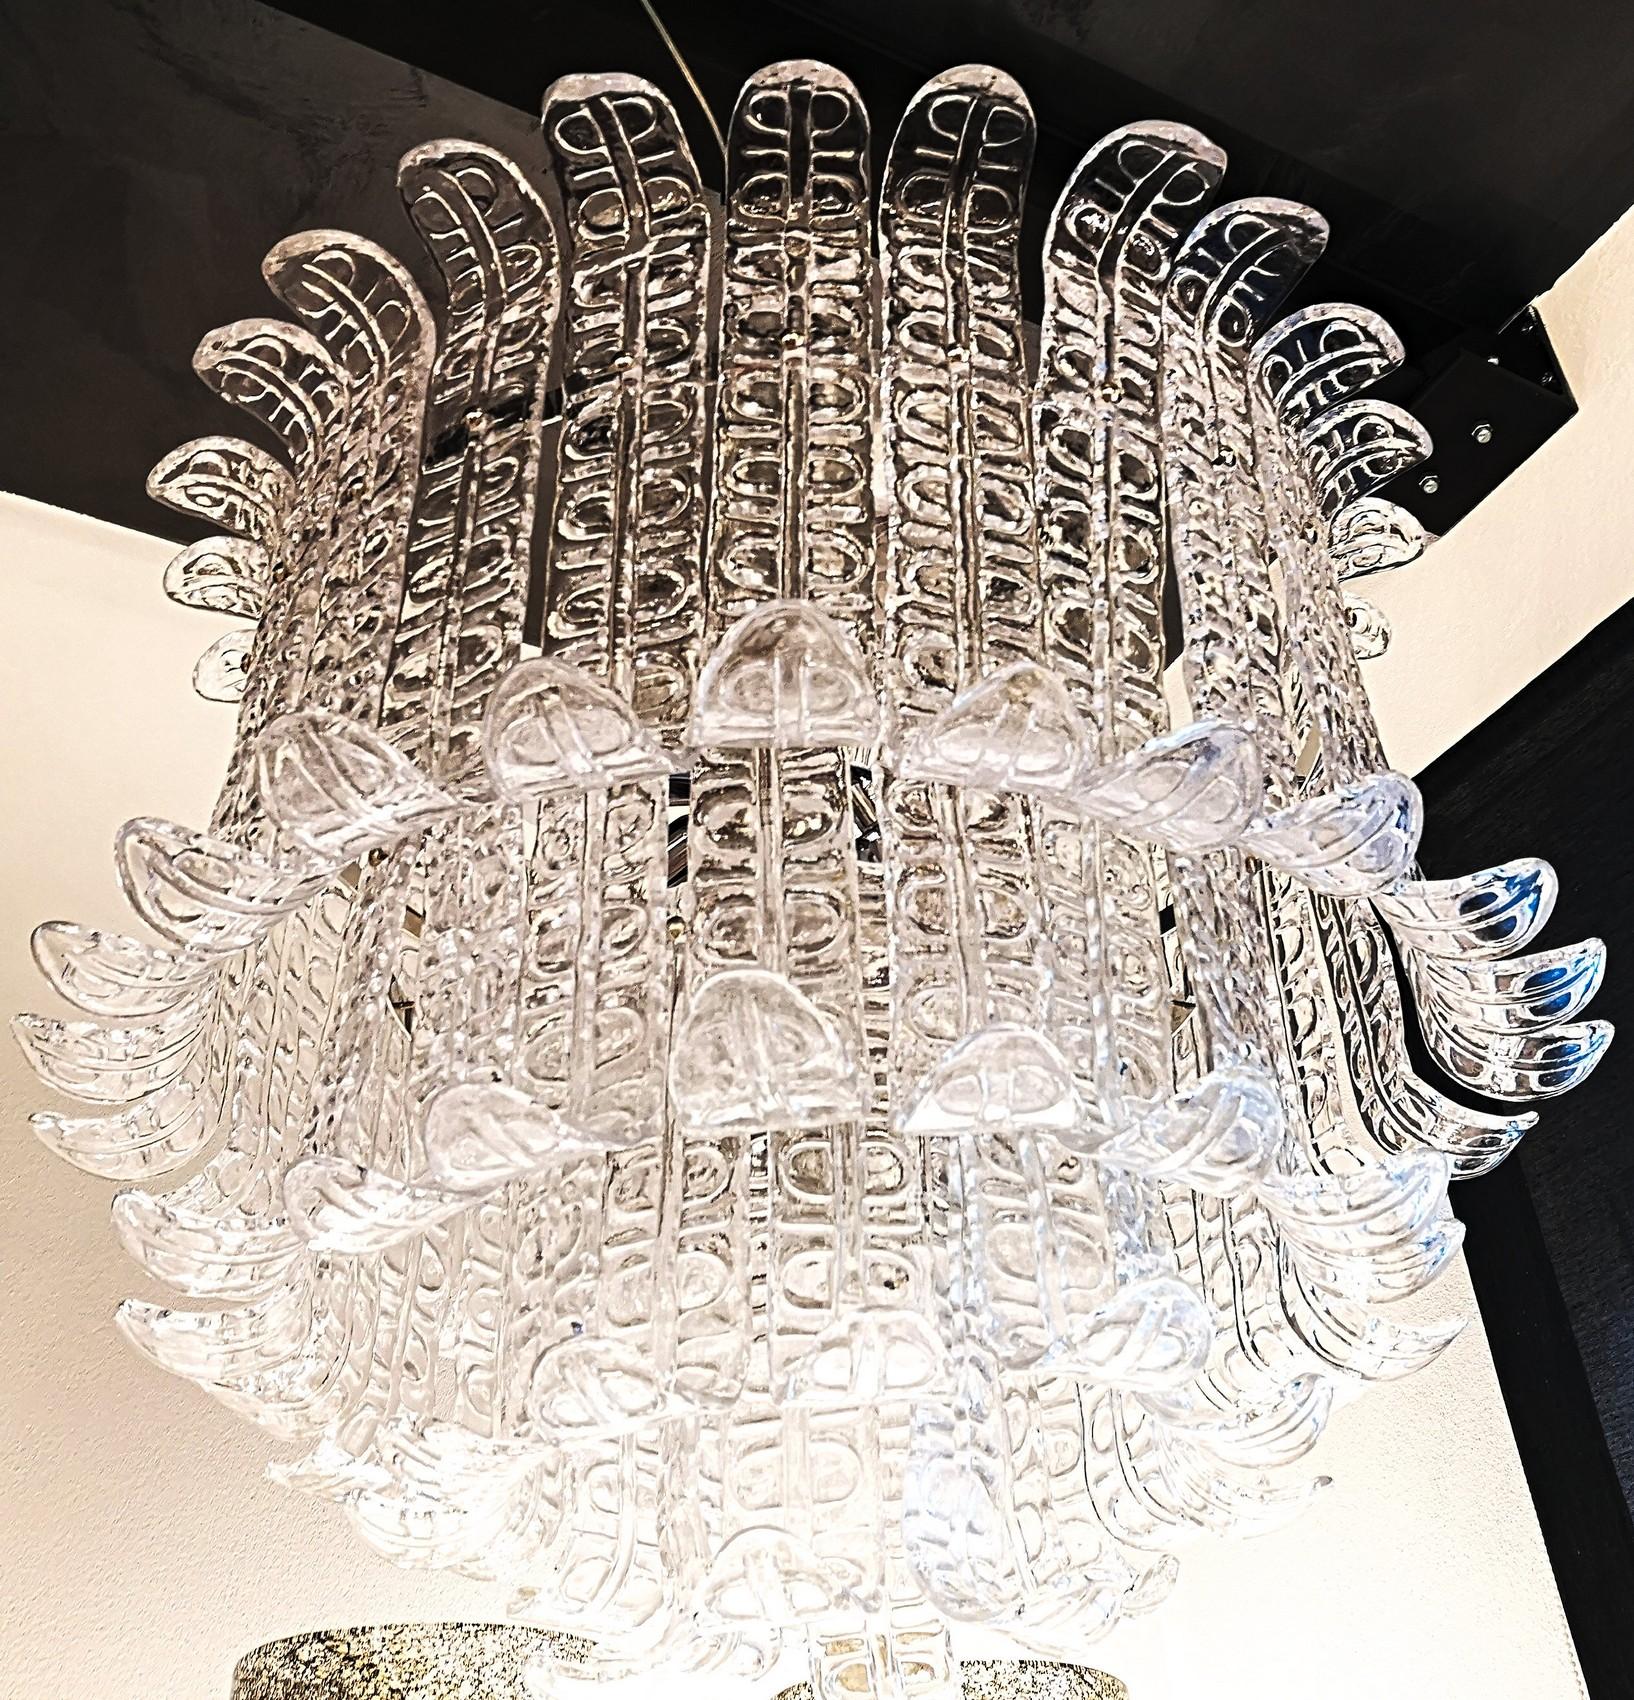 Great midcentury chandelier. Four tiers of Felci elements to tightly fence the bulb and the hardware.
Clear glass for a greater light output, the design on the leaves amplifies the reflection.

Piastra technique. Murano clear glass is poured over